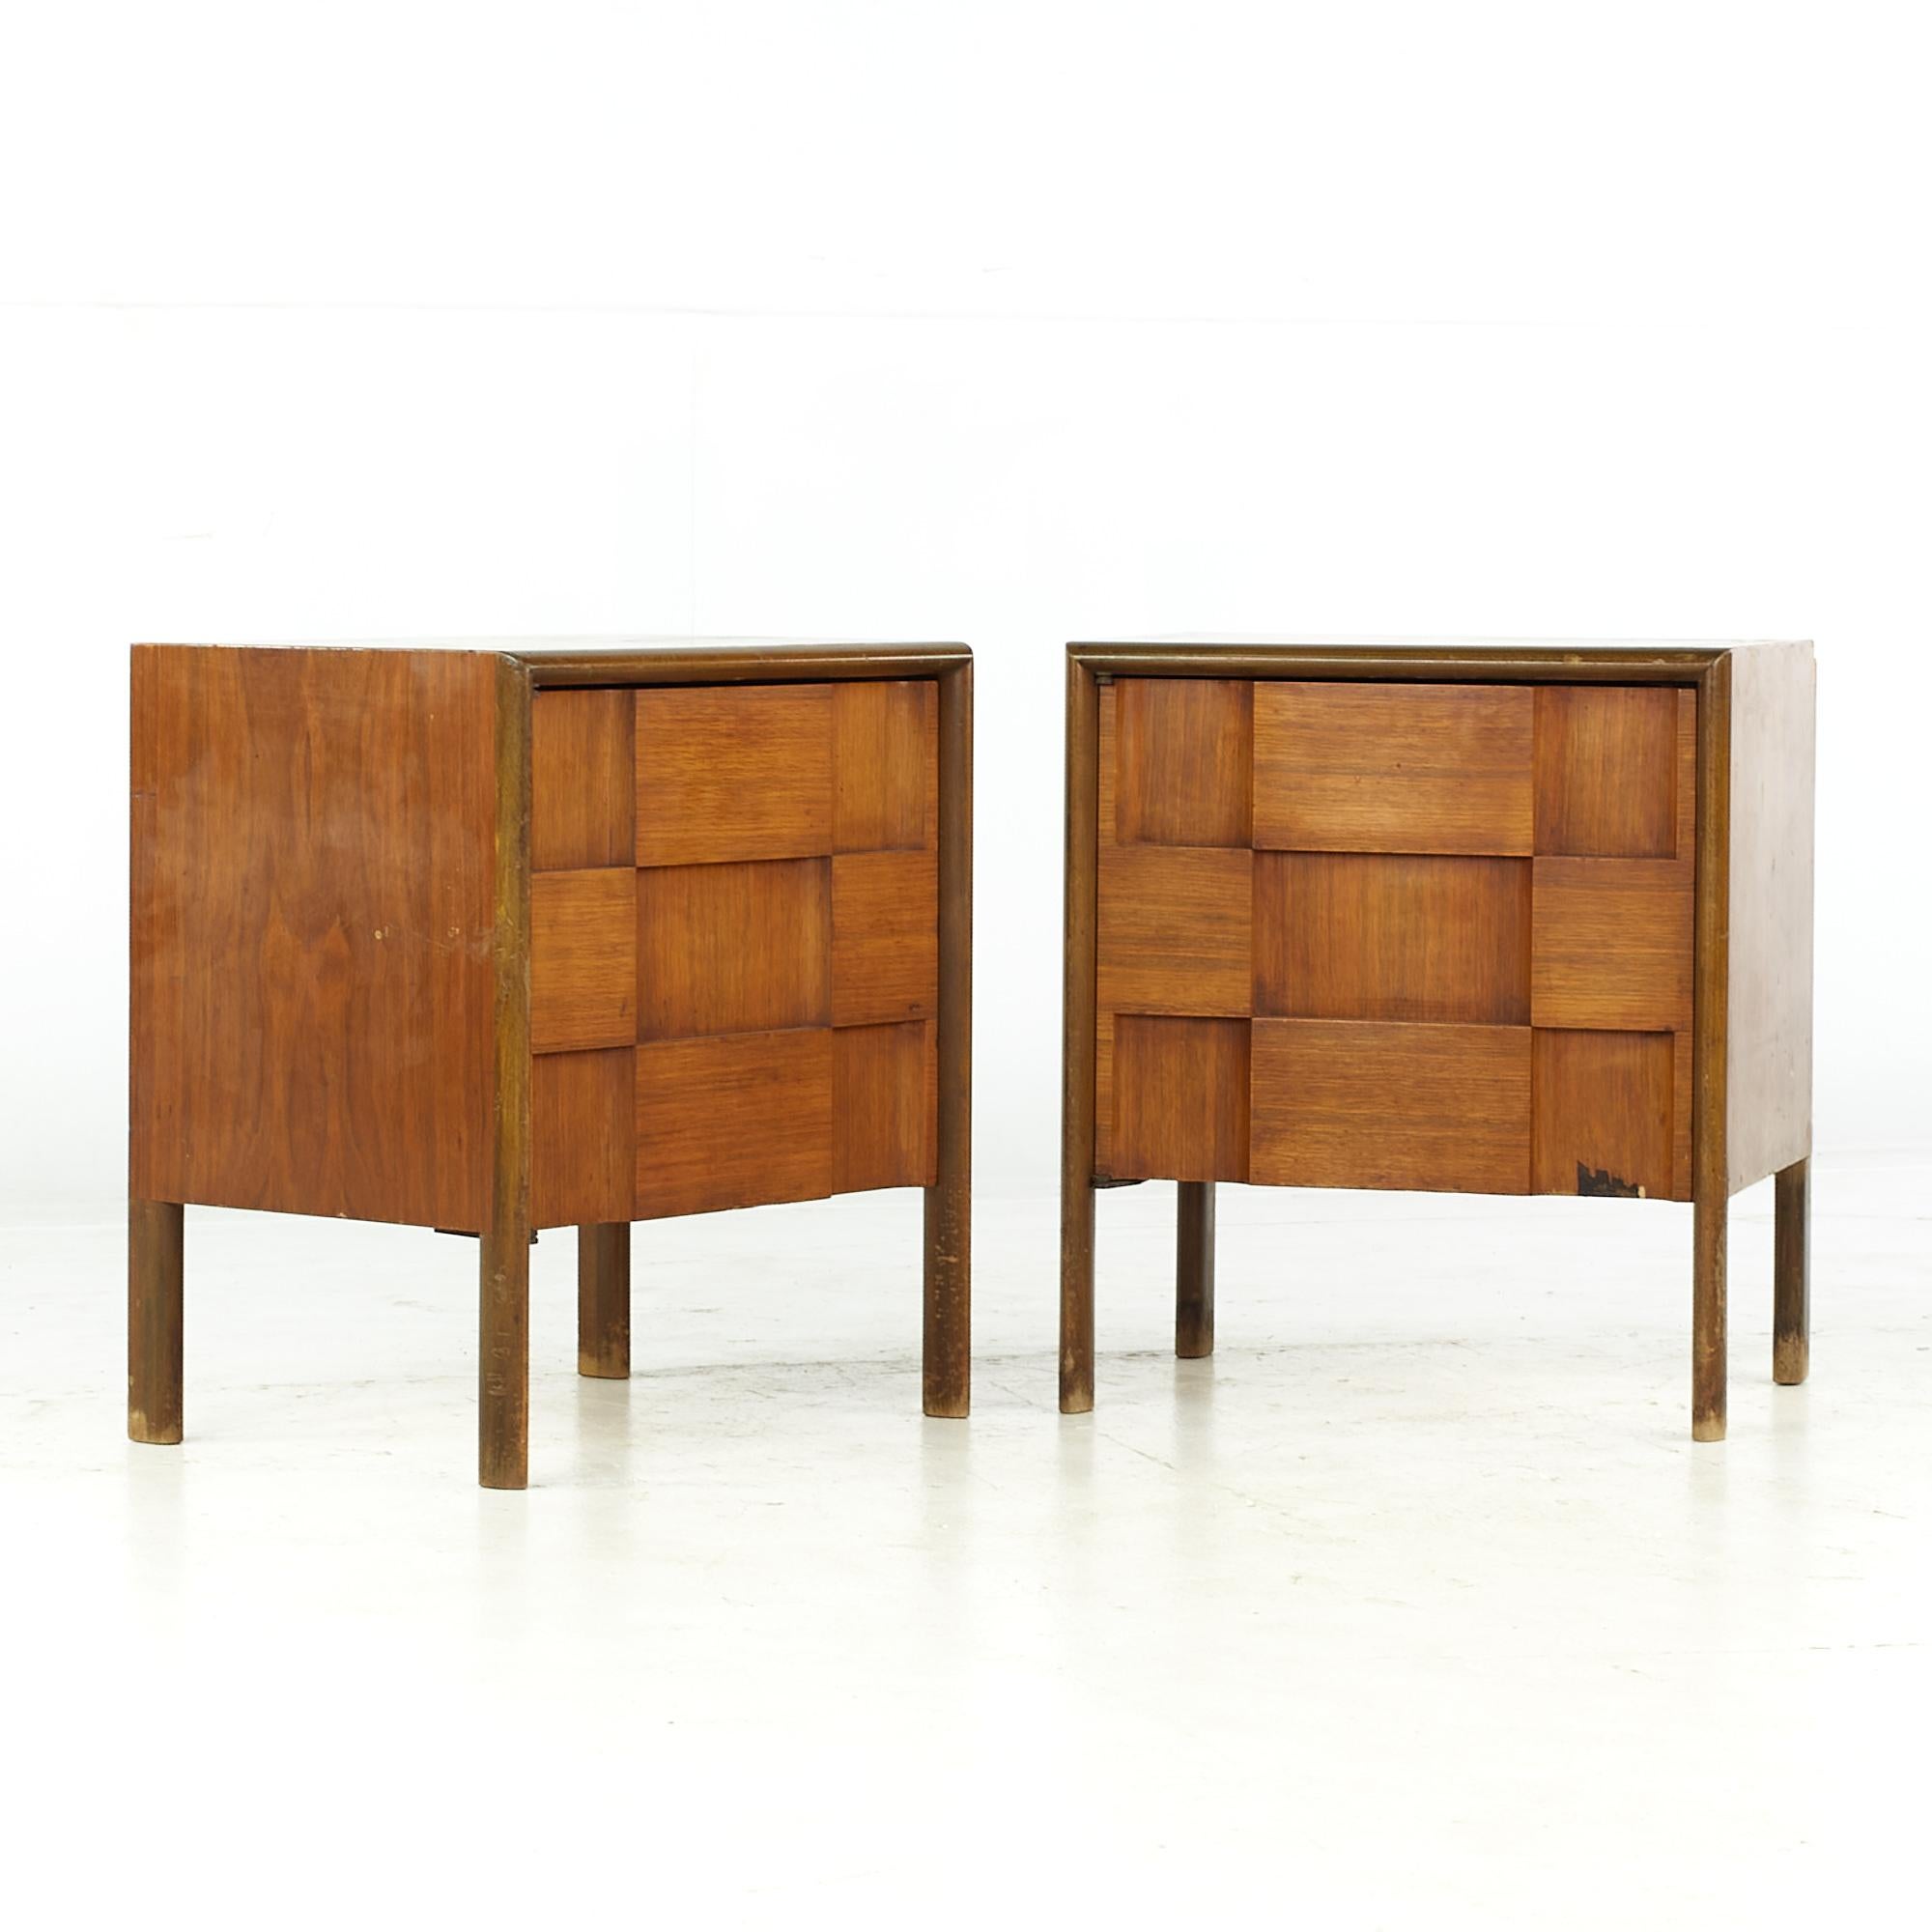 Edmond Spence midcentury Swedish walnut Nightstands - pair

Each nightstand measures: 21 wide x 15.75 deep x 24 inches high

All pieces of furniture can be had in what we call restored vintage condition. That means the piece is restored upon